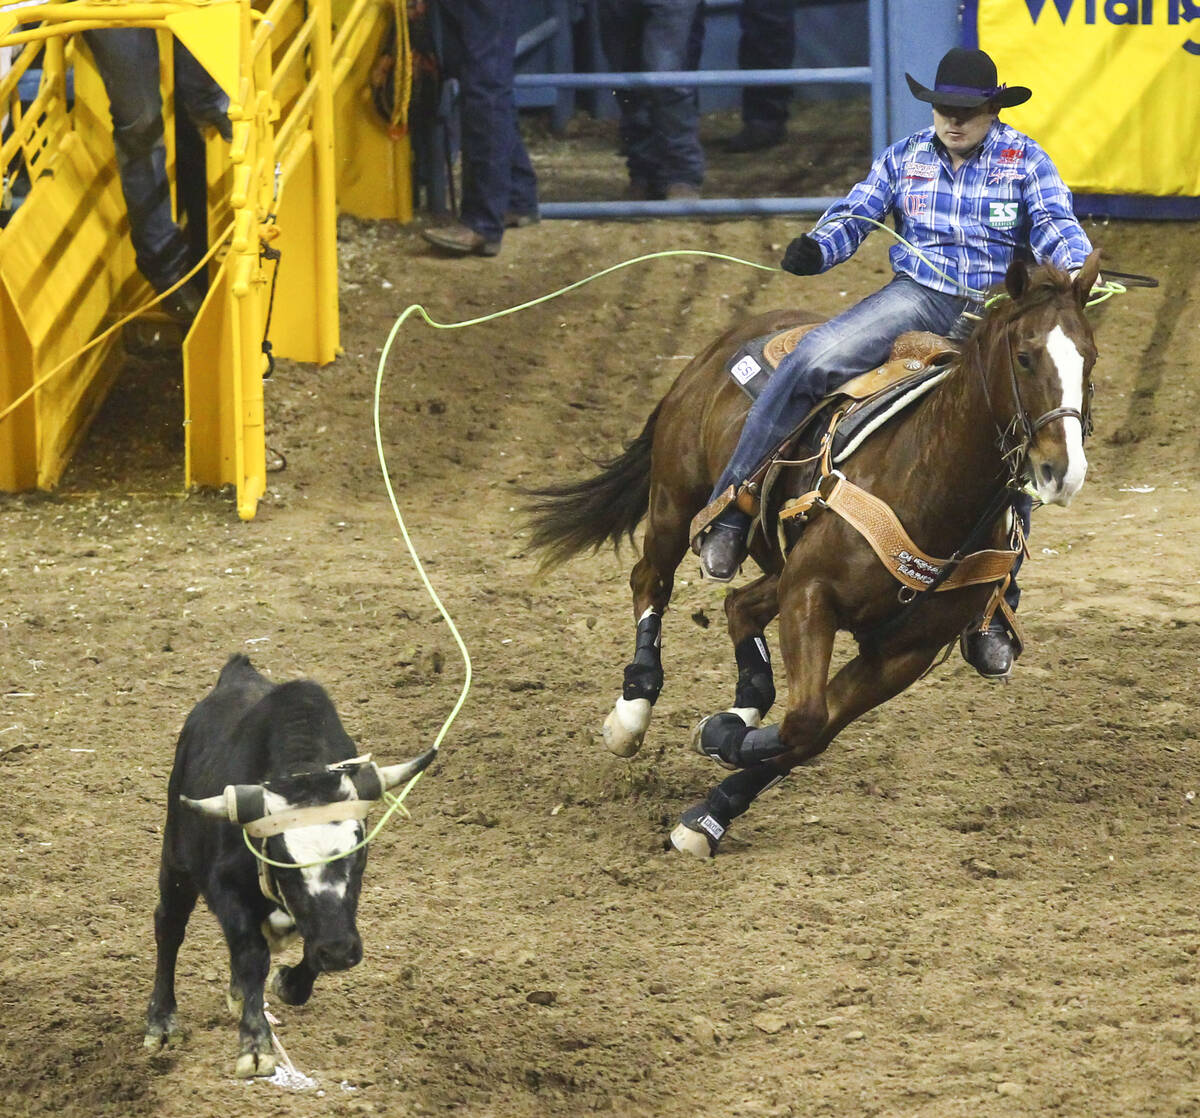 Kaleb Driggers competes in the team roping event during the 3rd go-round of the National Finals ...